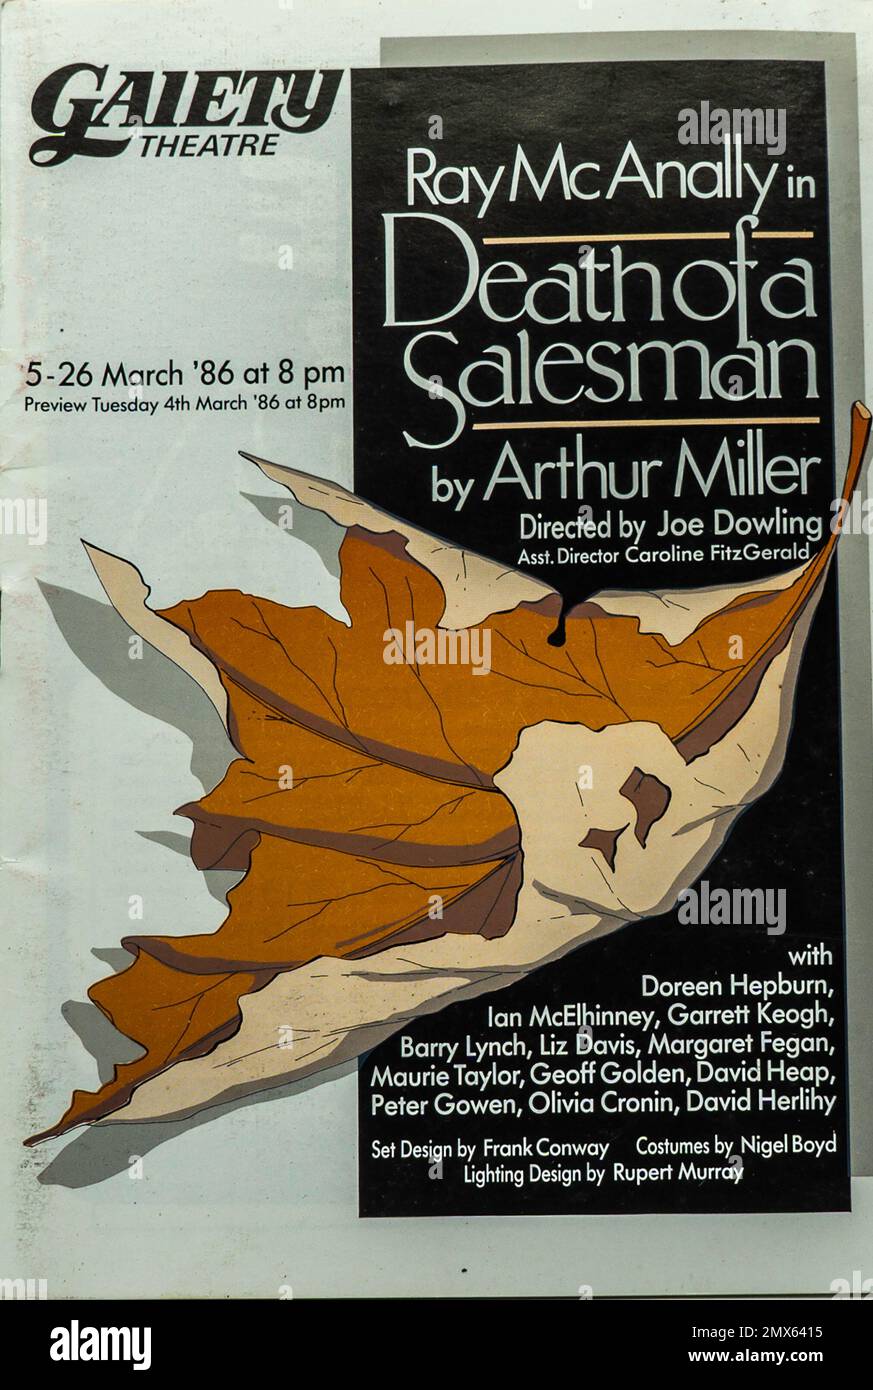 The 1986 programme for Arthur Miller’s, Death of a Salesman, starring Ray McAnally in The Gaiety Theatre, Dublin, Ireland. Stock Photo